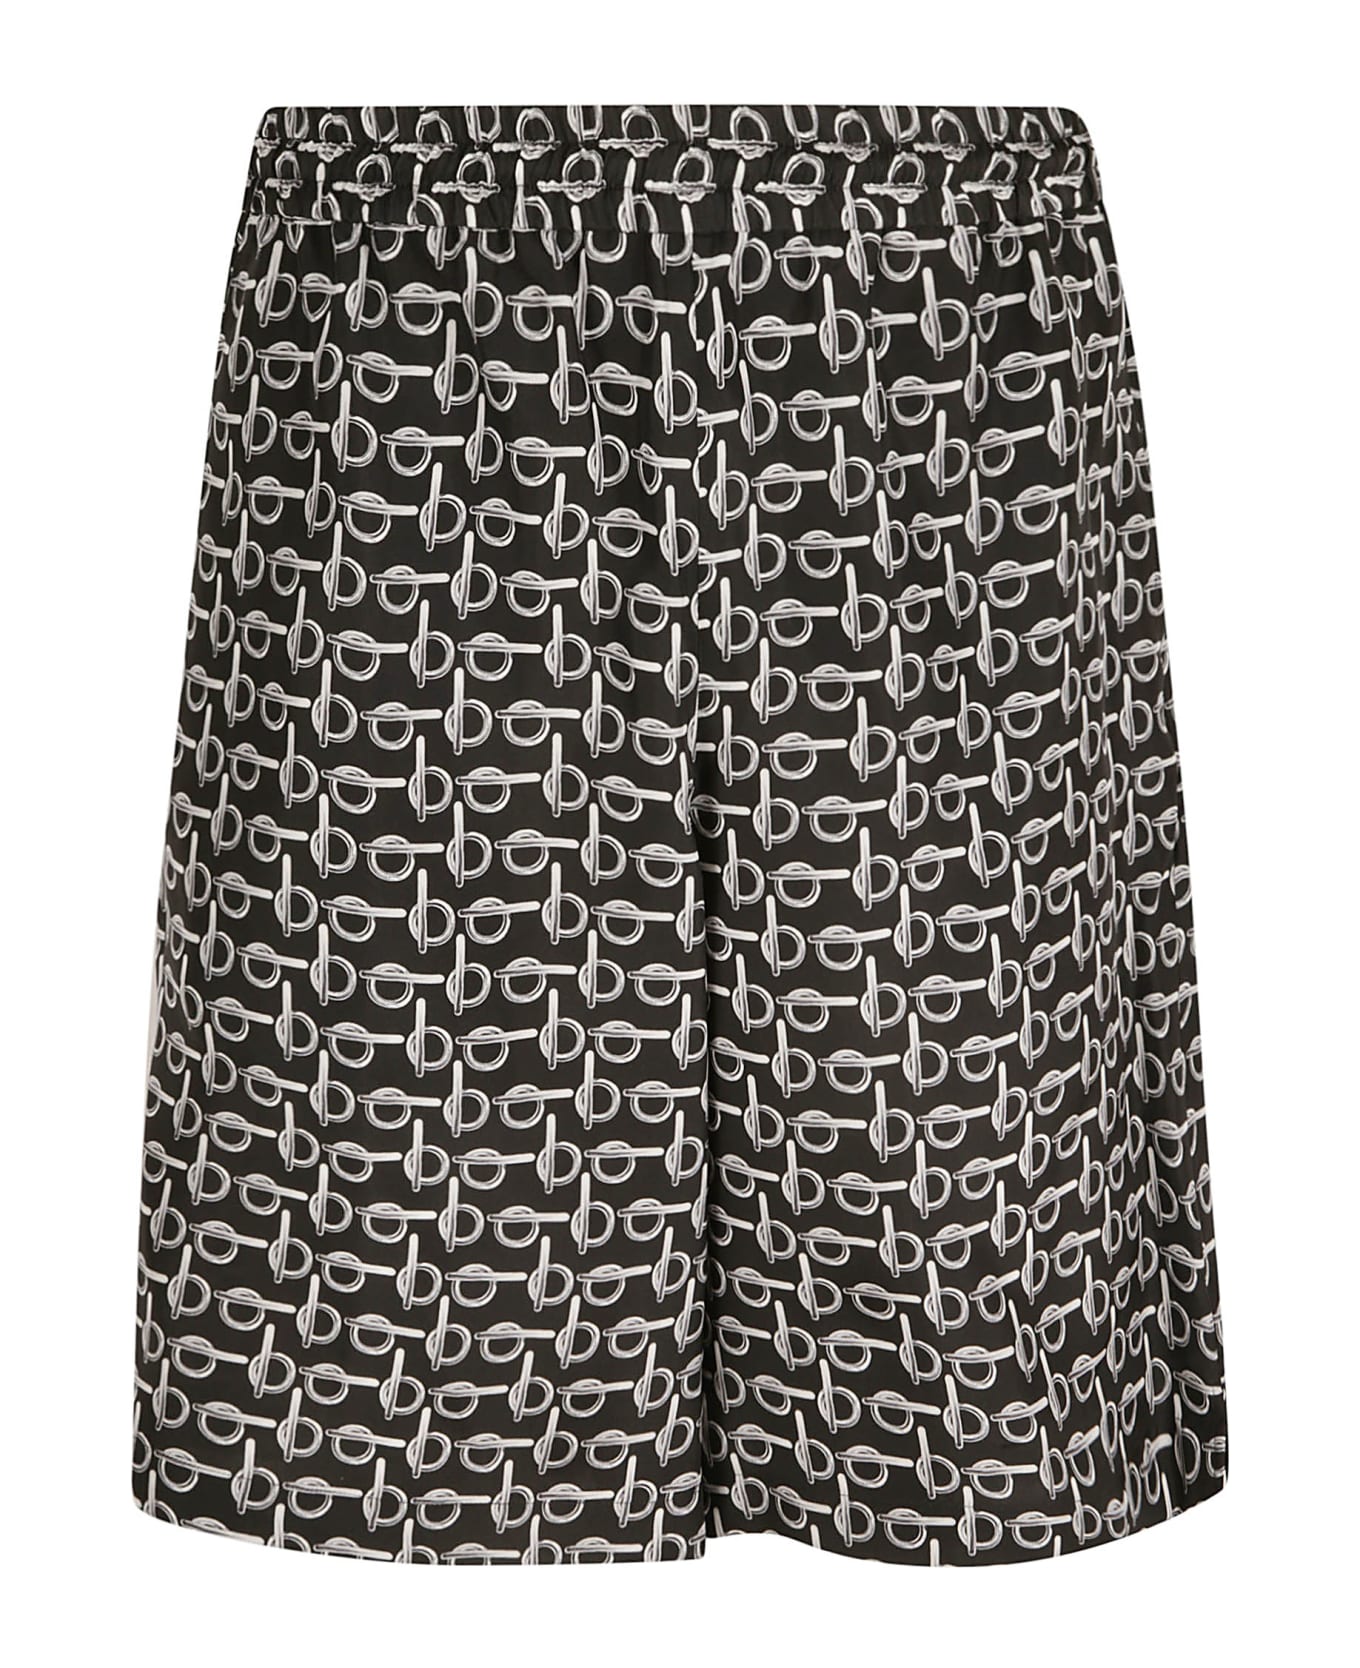 Burberry All-over Pattern Printed Shorts - Silver/Black